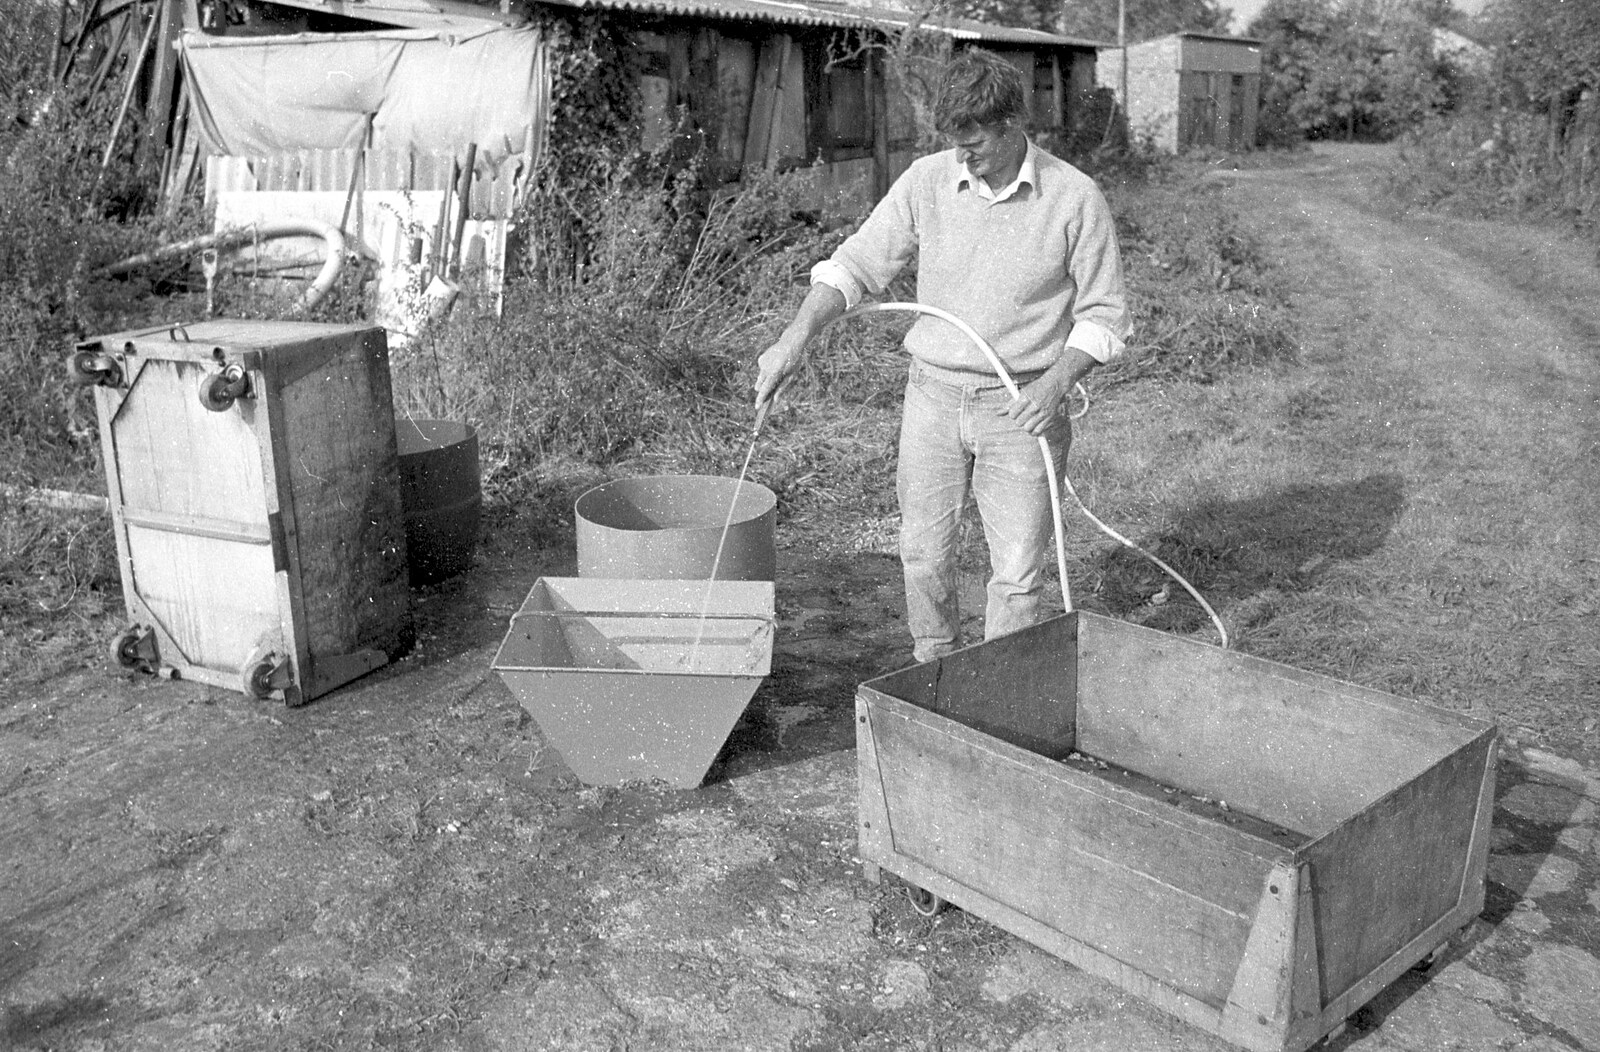 The chopper hopper is washed out from Cider Making in Black and White, Stuston, Suffolk - 11th October 1992